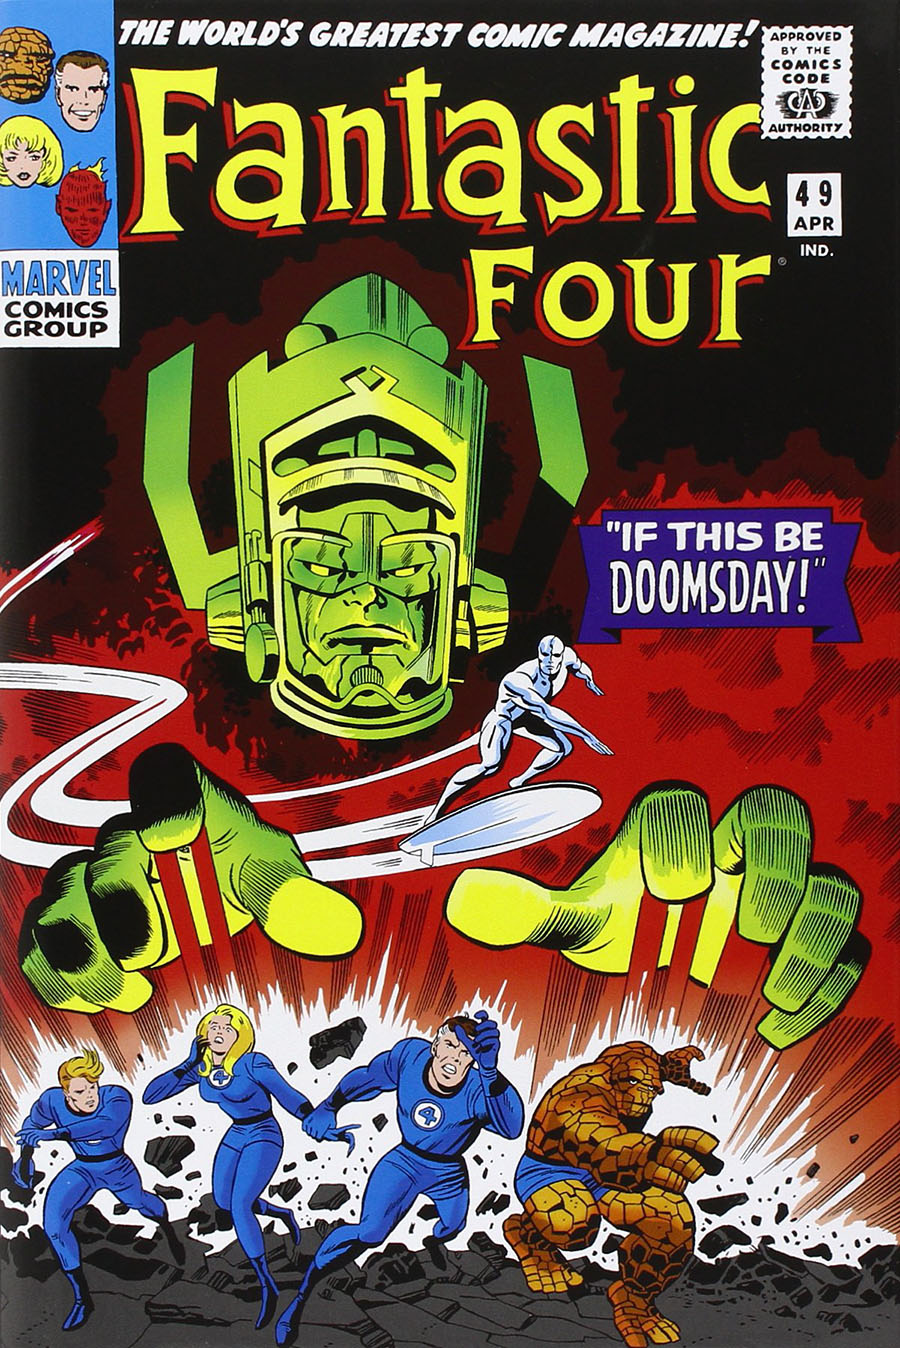 Fantastic Four Omnibus Vol 2 HC Book Market Jack Kirby Cover New Printing